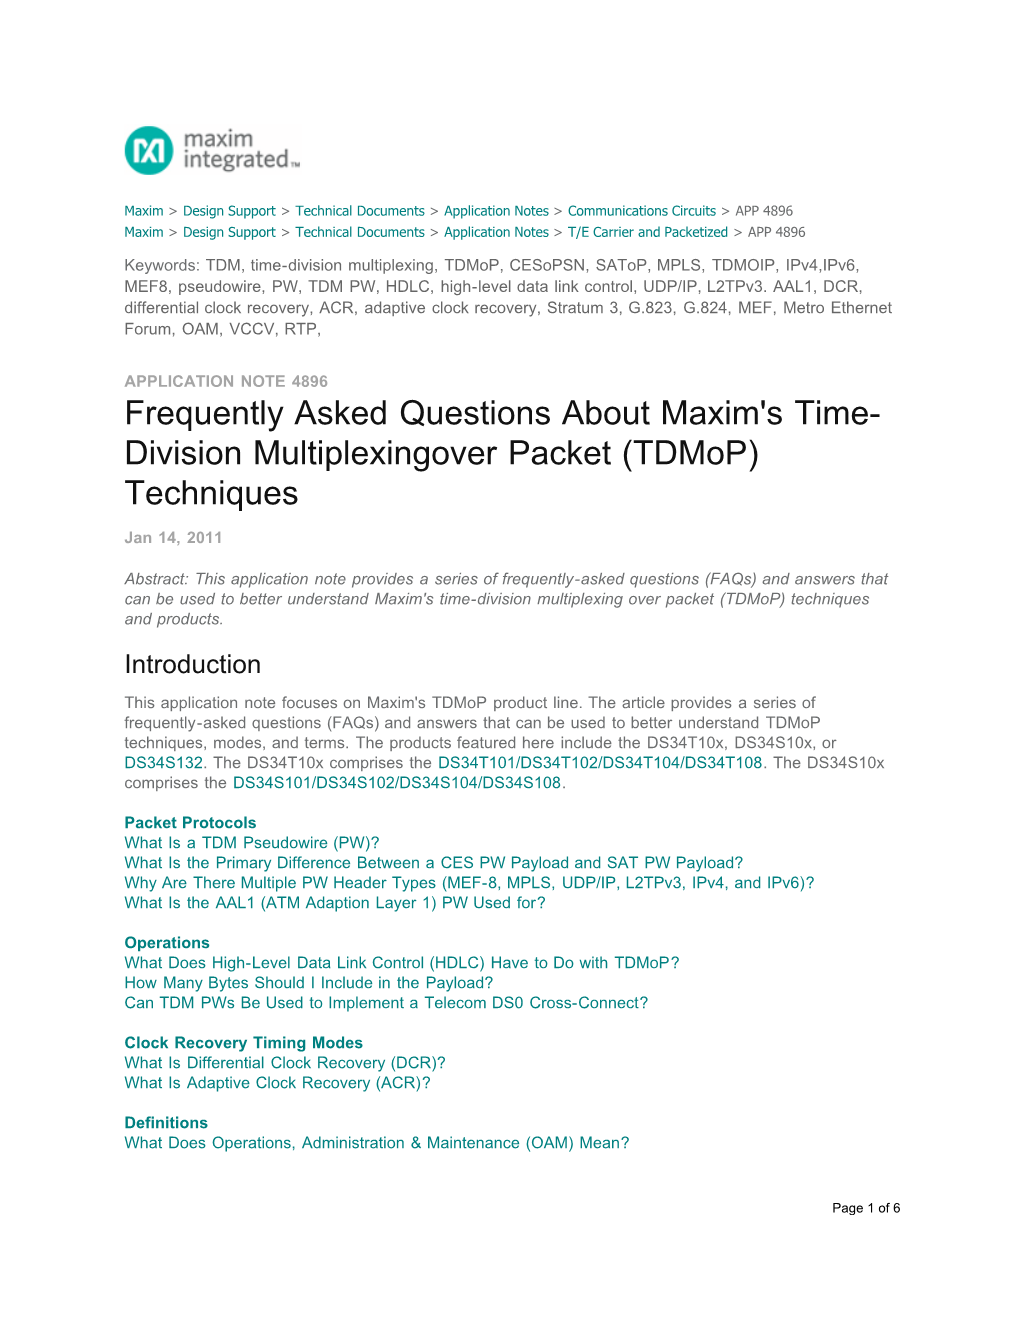 Frequently Asked Questions About Maxim's Time- Division Multiplexingover Packet (Tdmop) Techniques